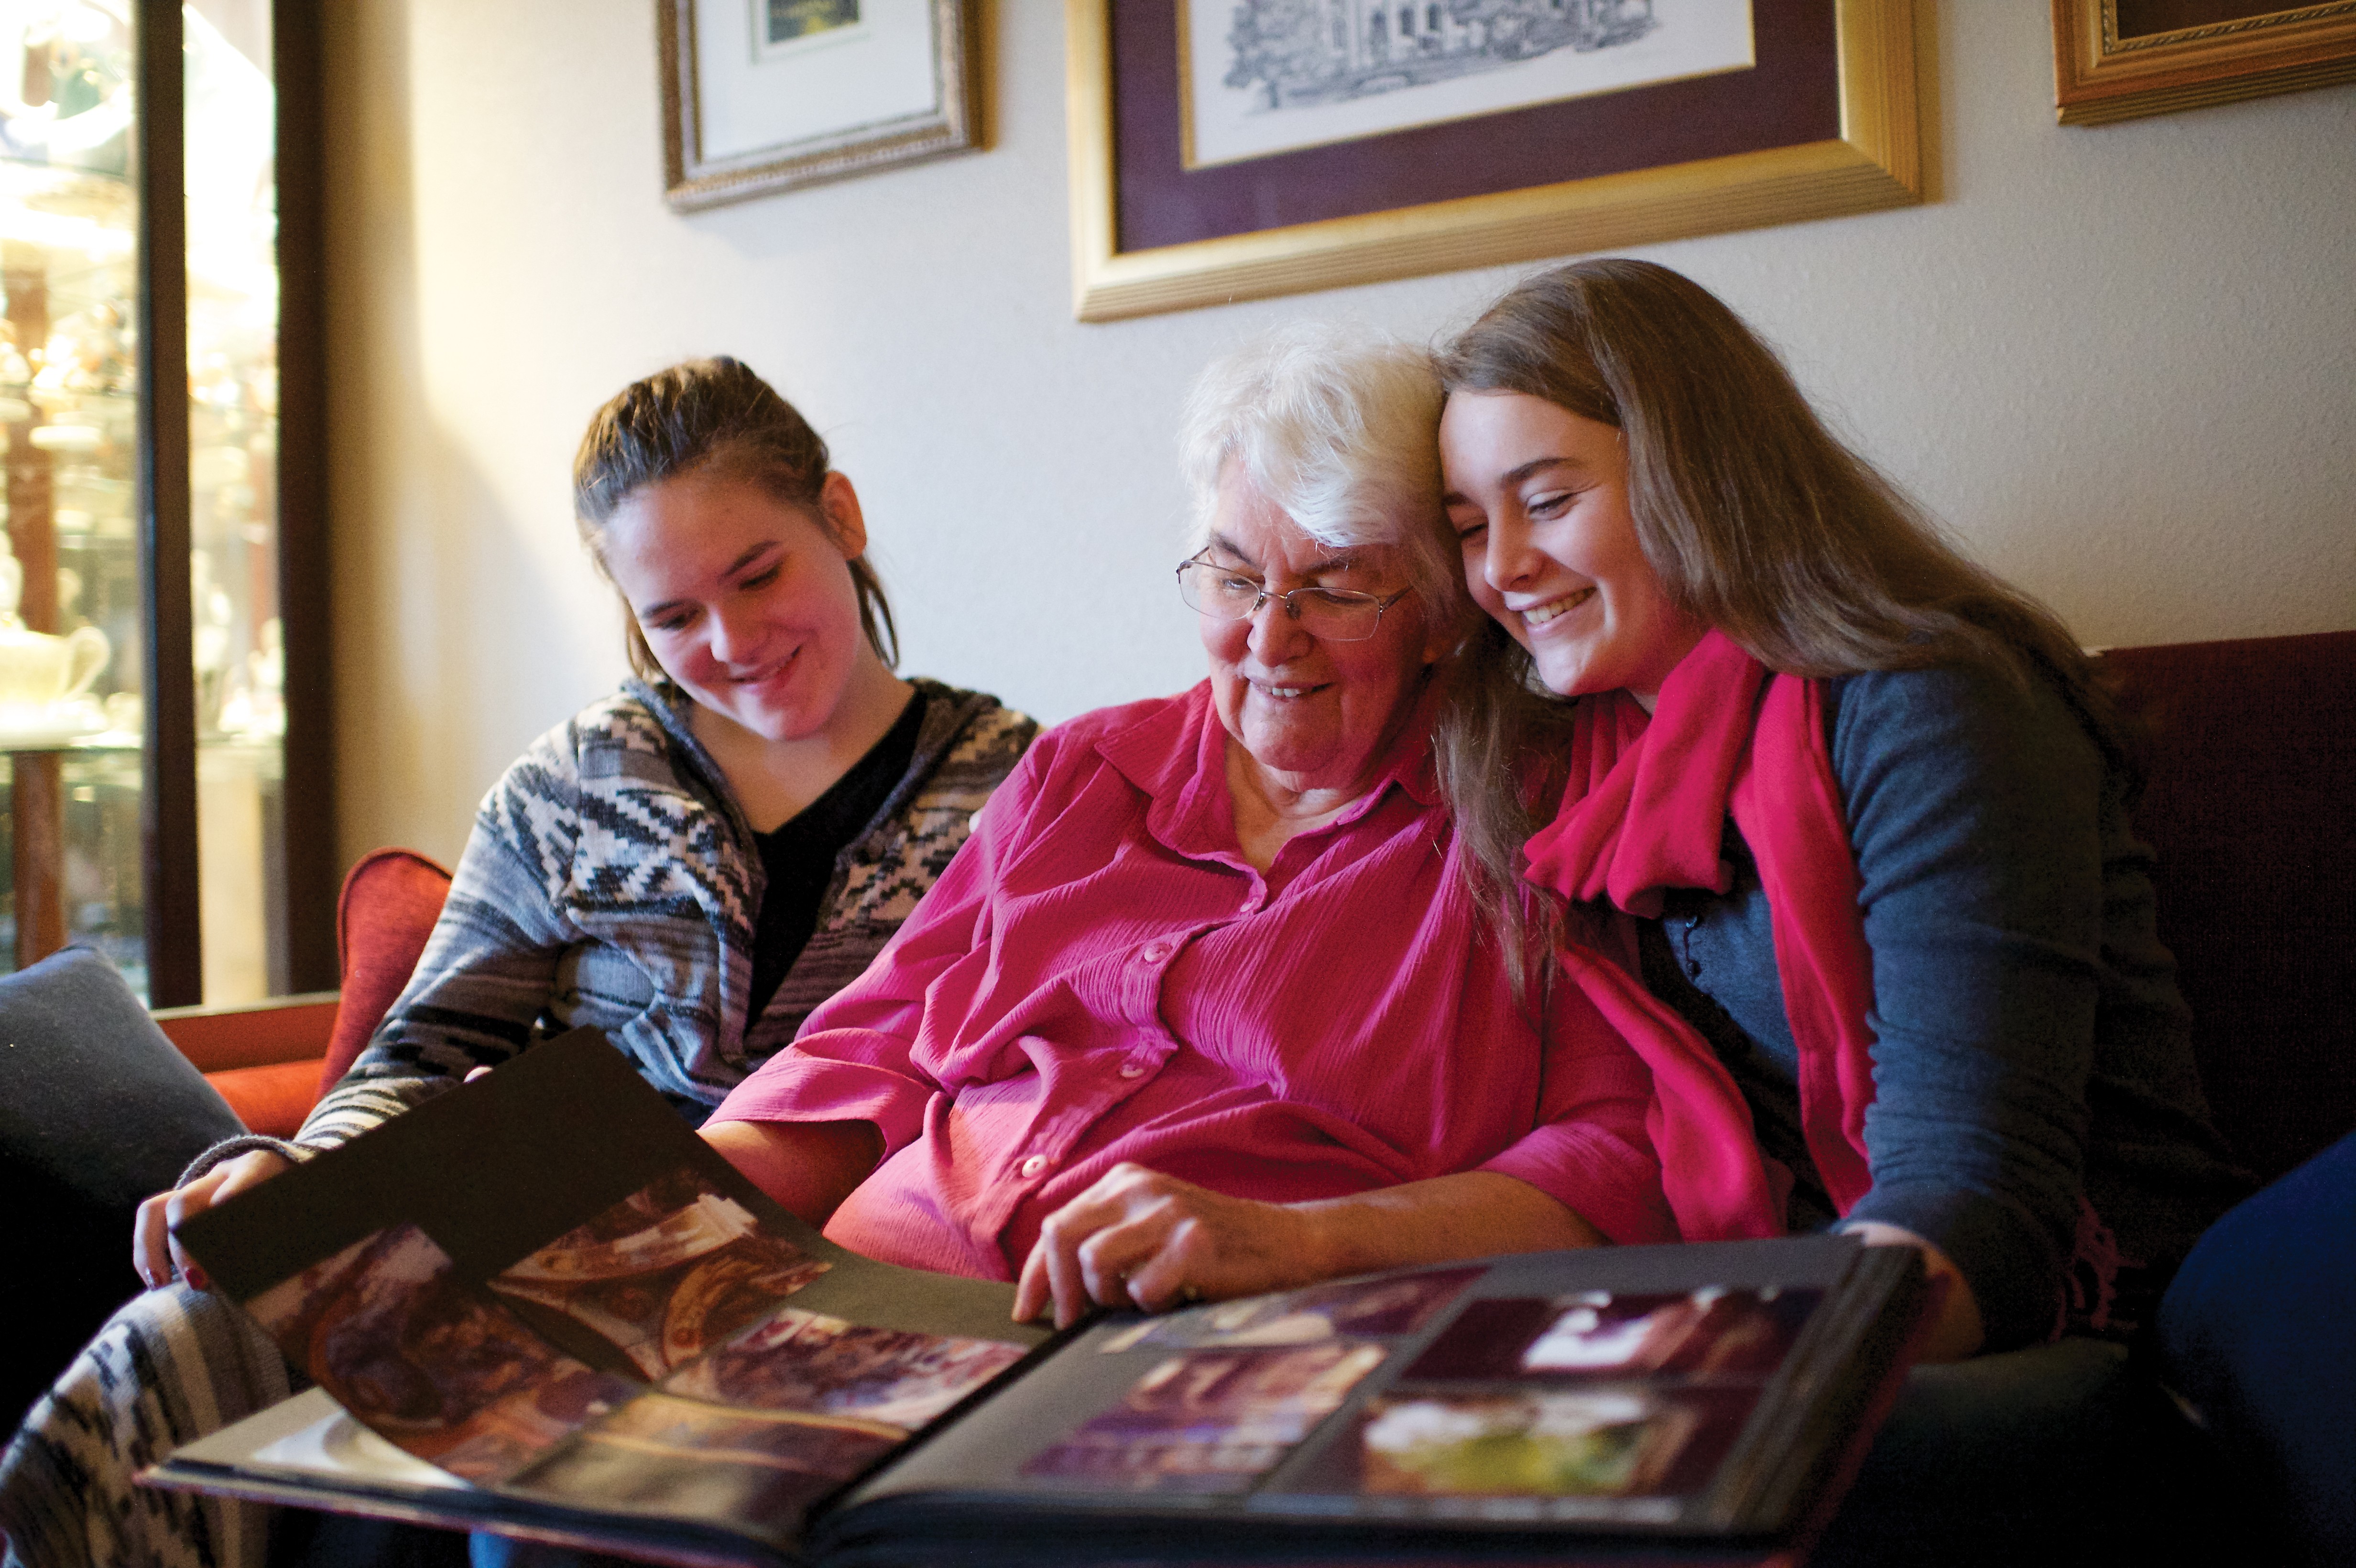 An elderly woman sits on a couch with her two granddaughters, looking at an album of family photographs.